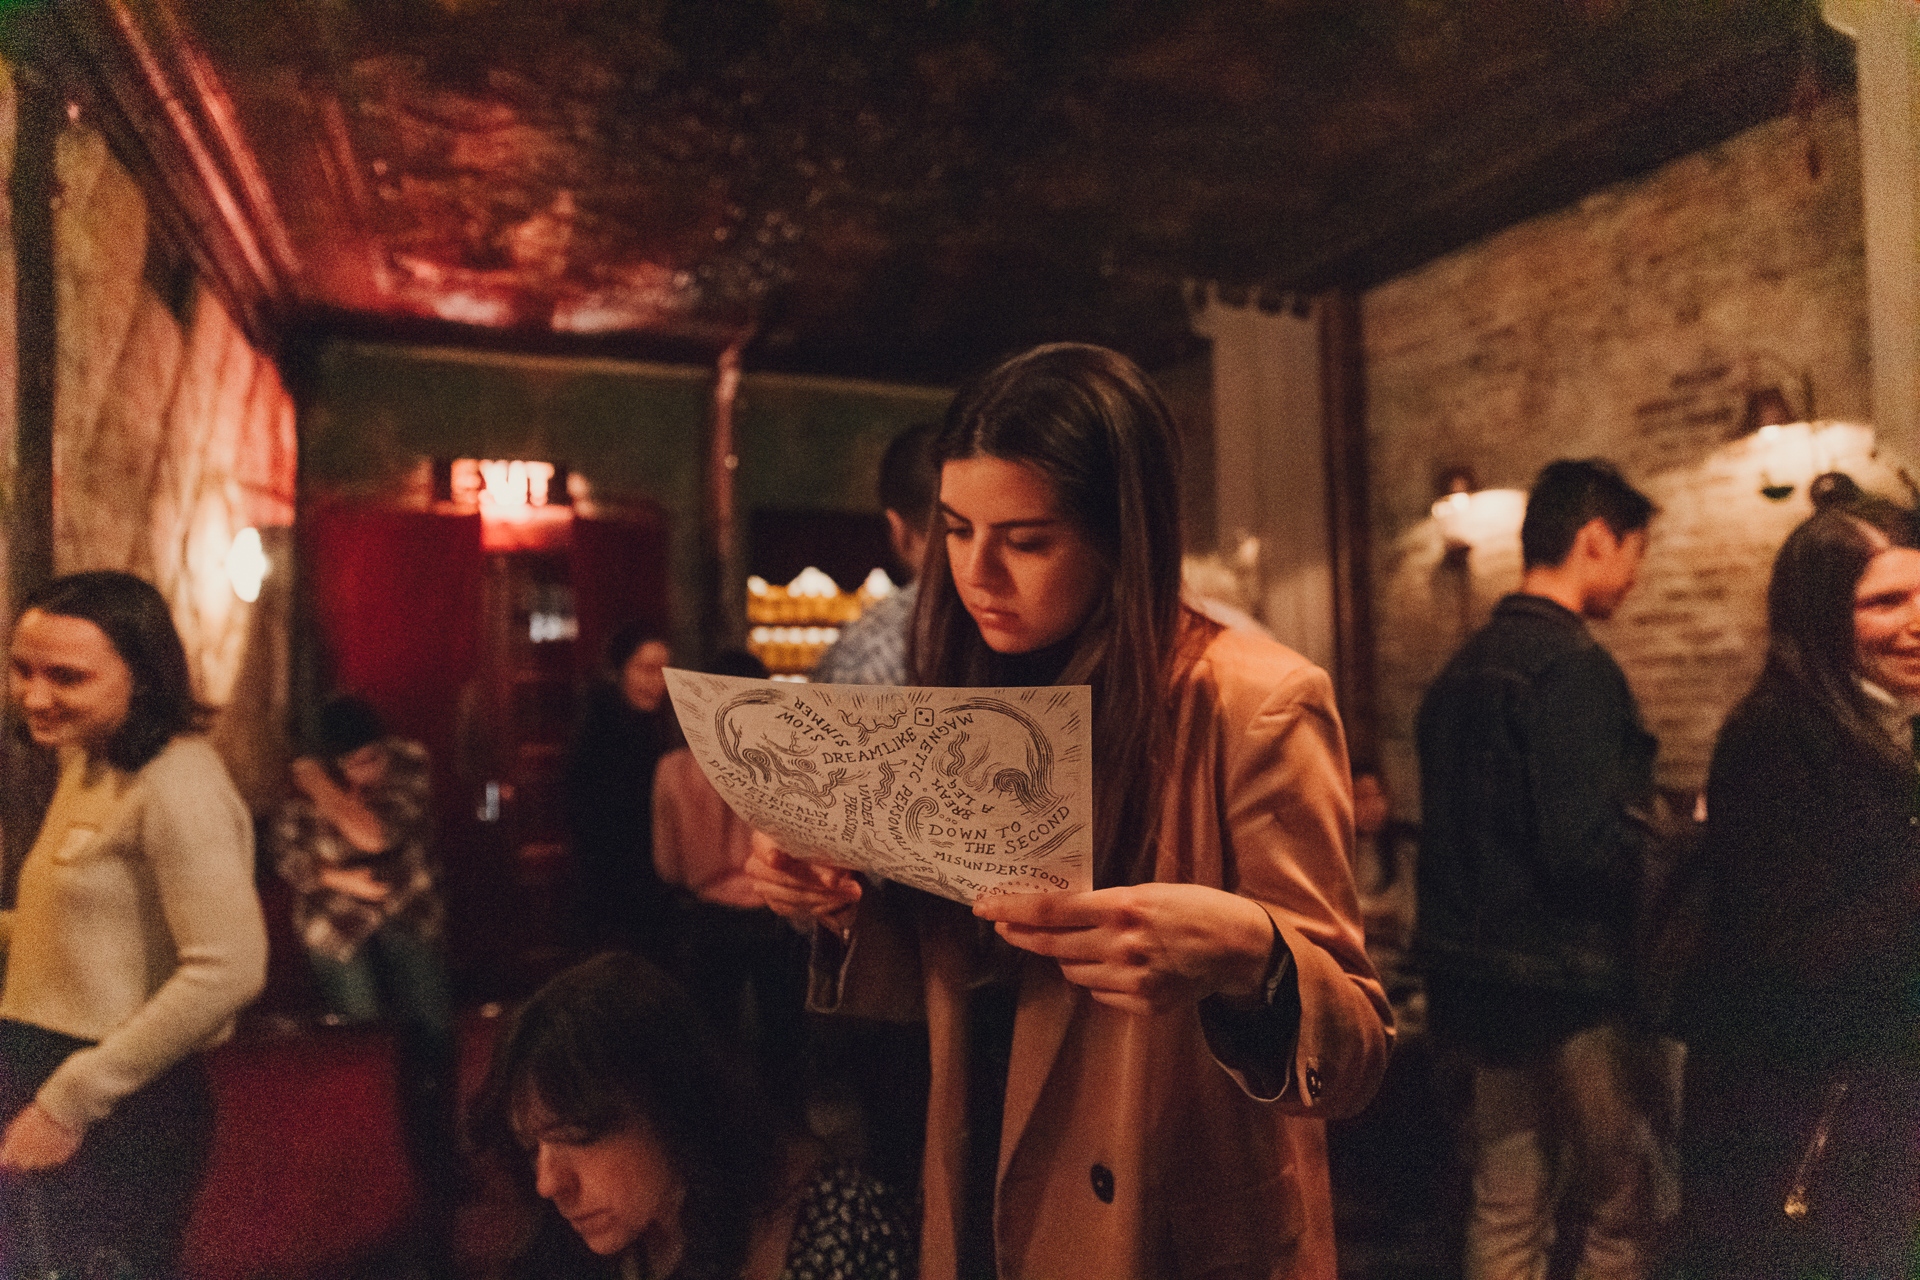 A woman solves a clue in a speakeasy.